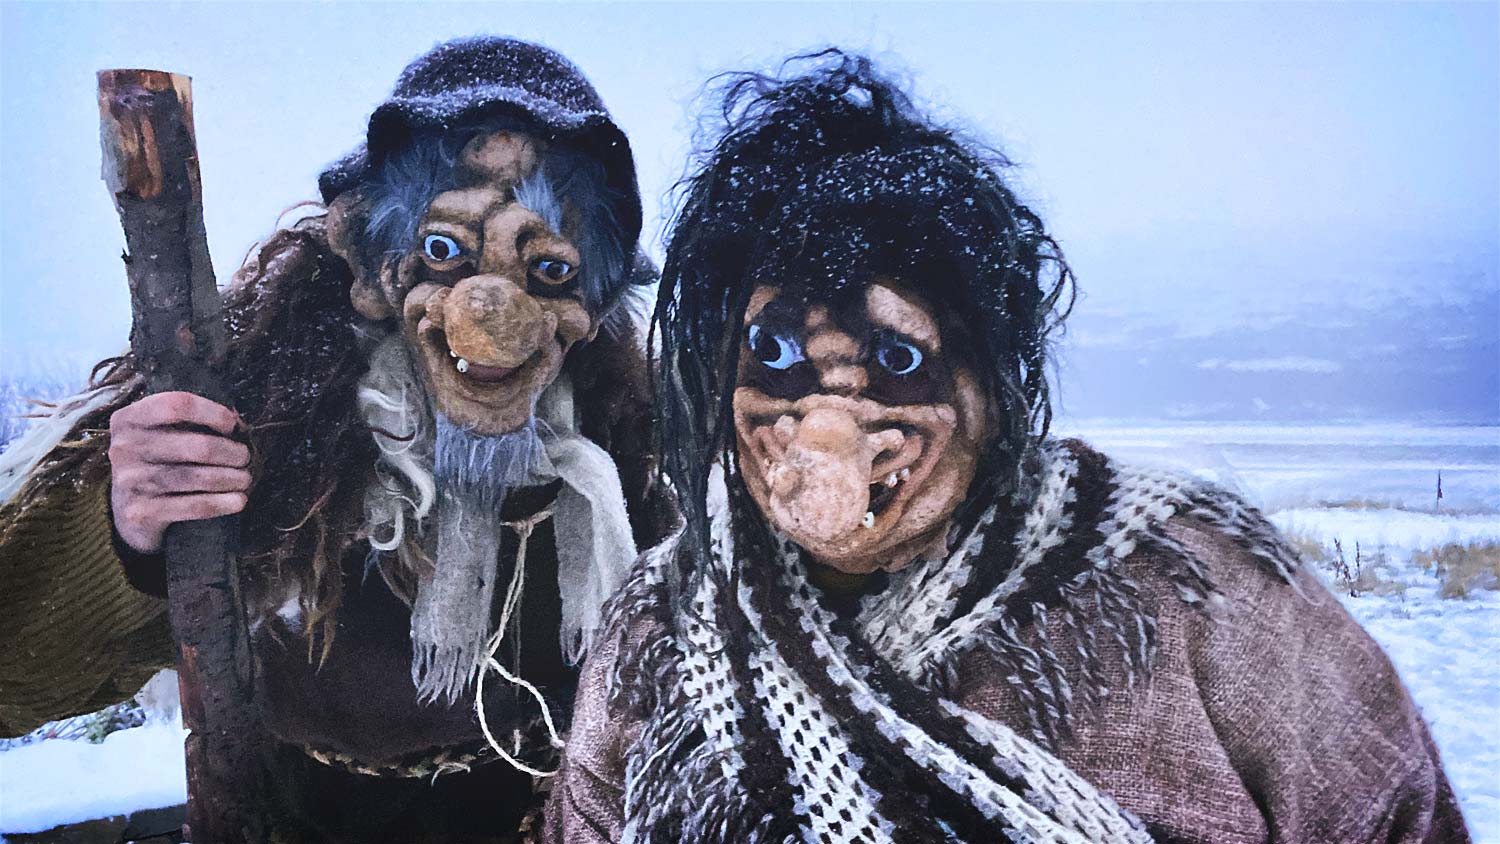 A couple of trolls in a snow landscape, one with a rod